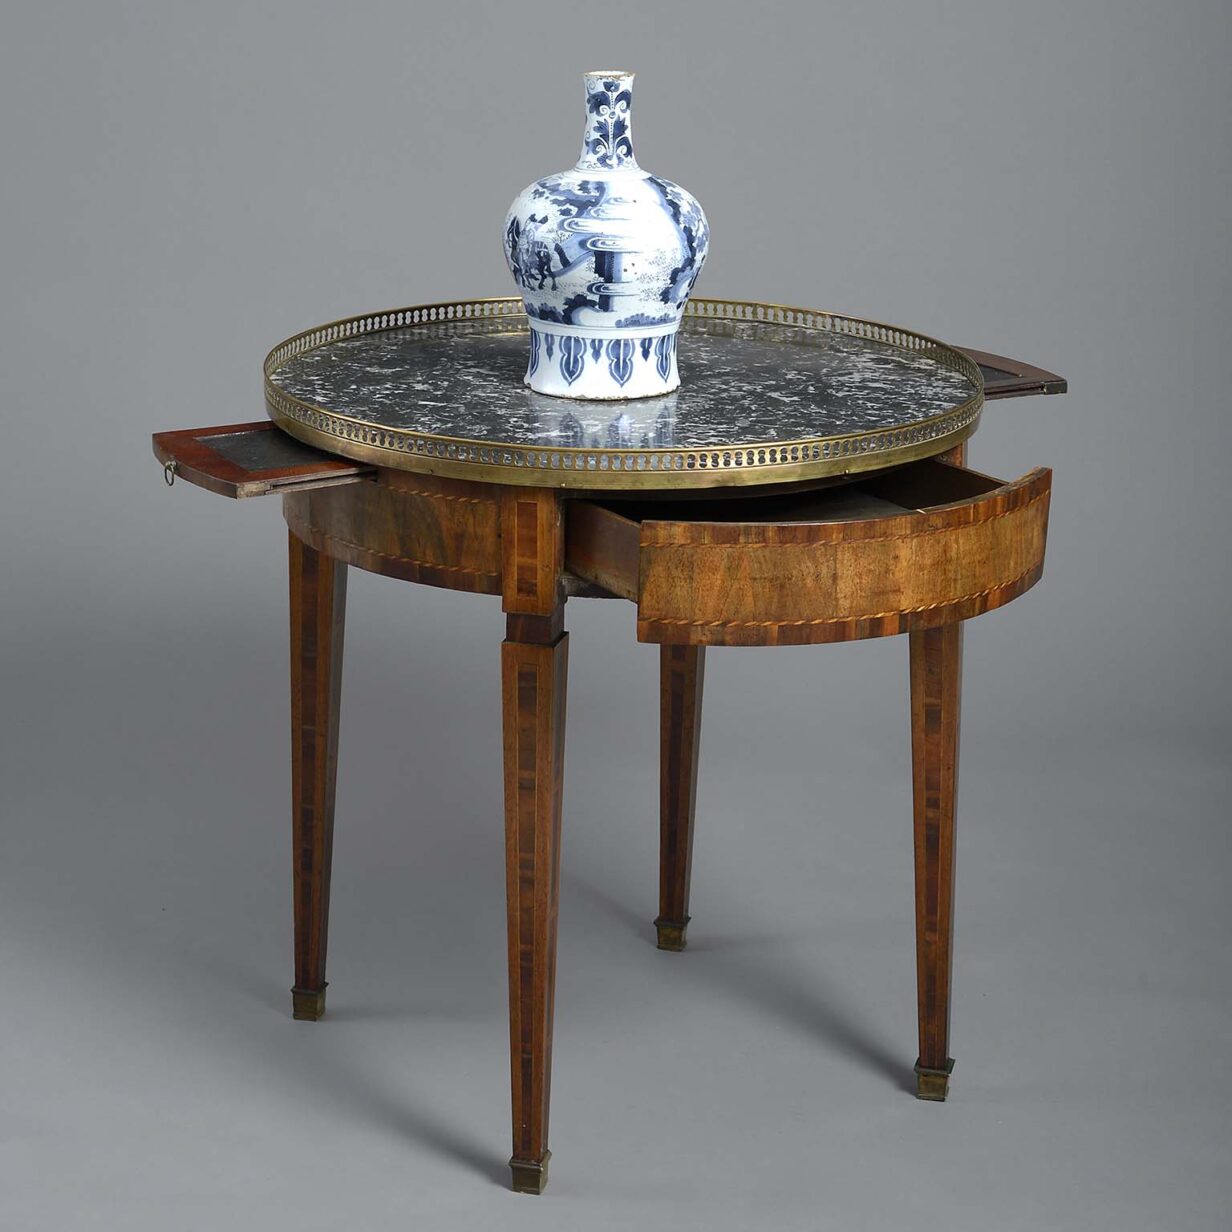 Late eighteenth century louis xvi period parquetry bouillotte table